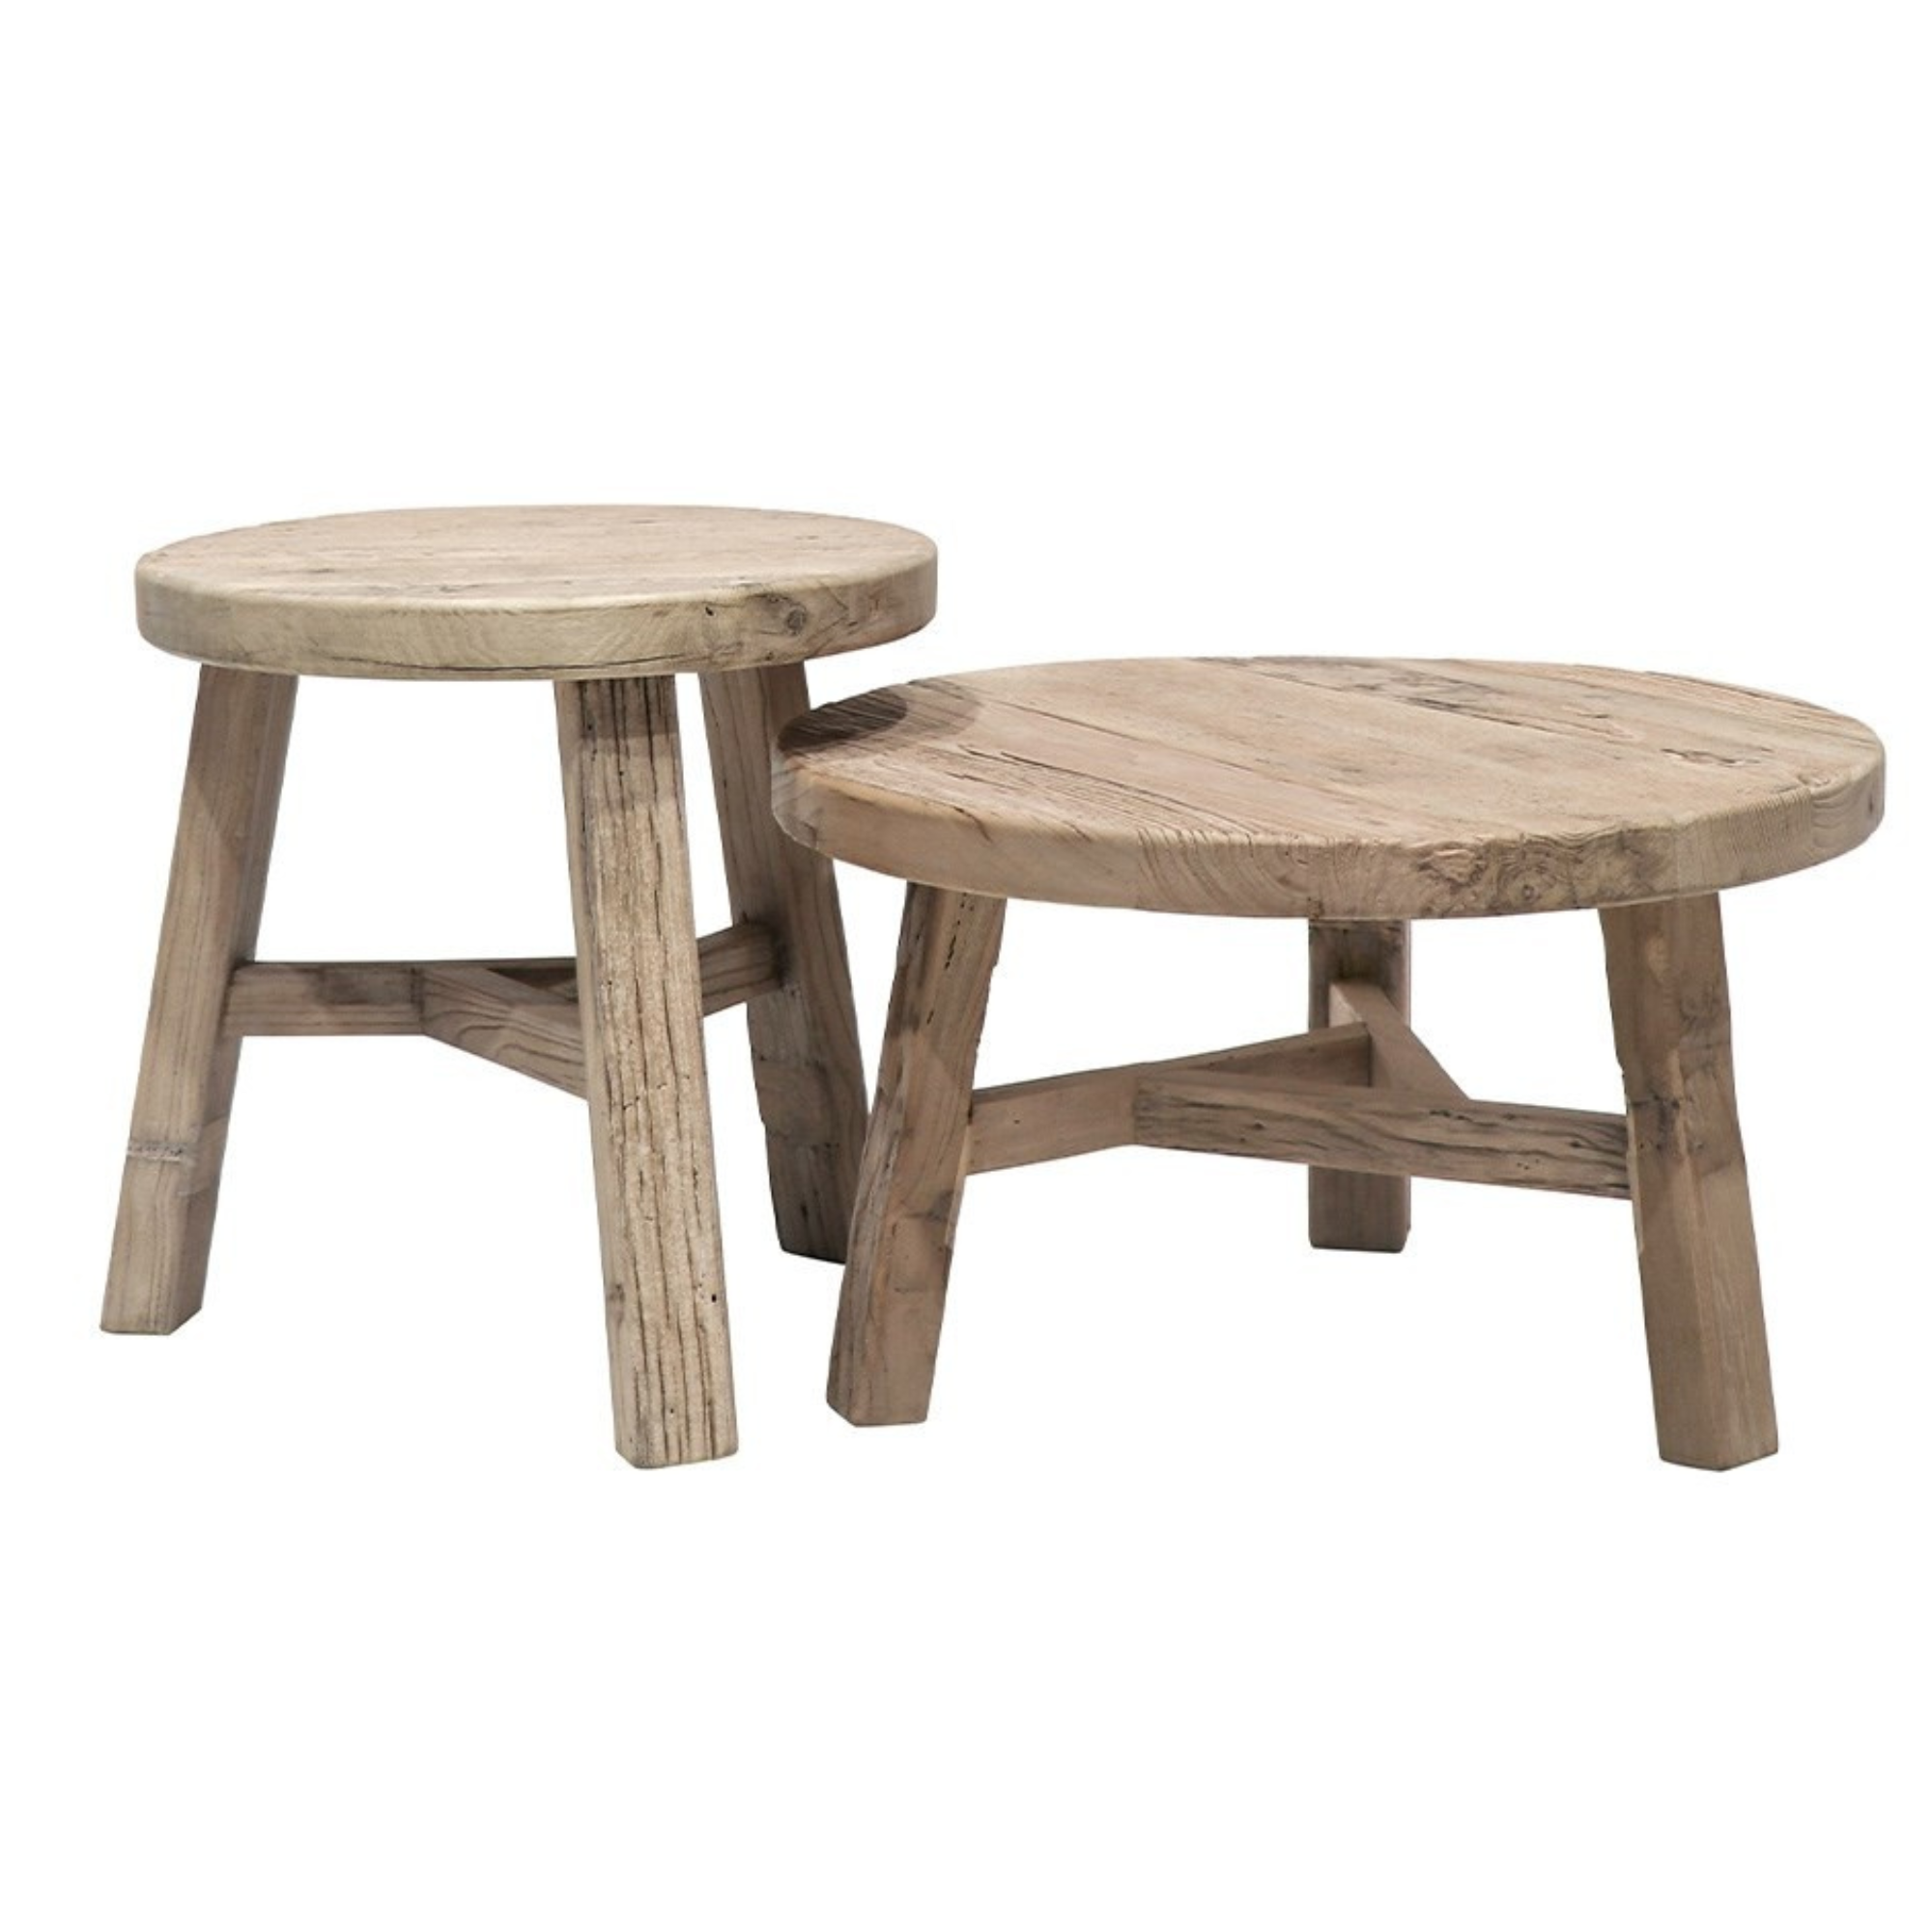 PARQ LOW NESTING TABLE | NATURAL OR BLACK